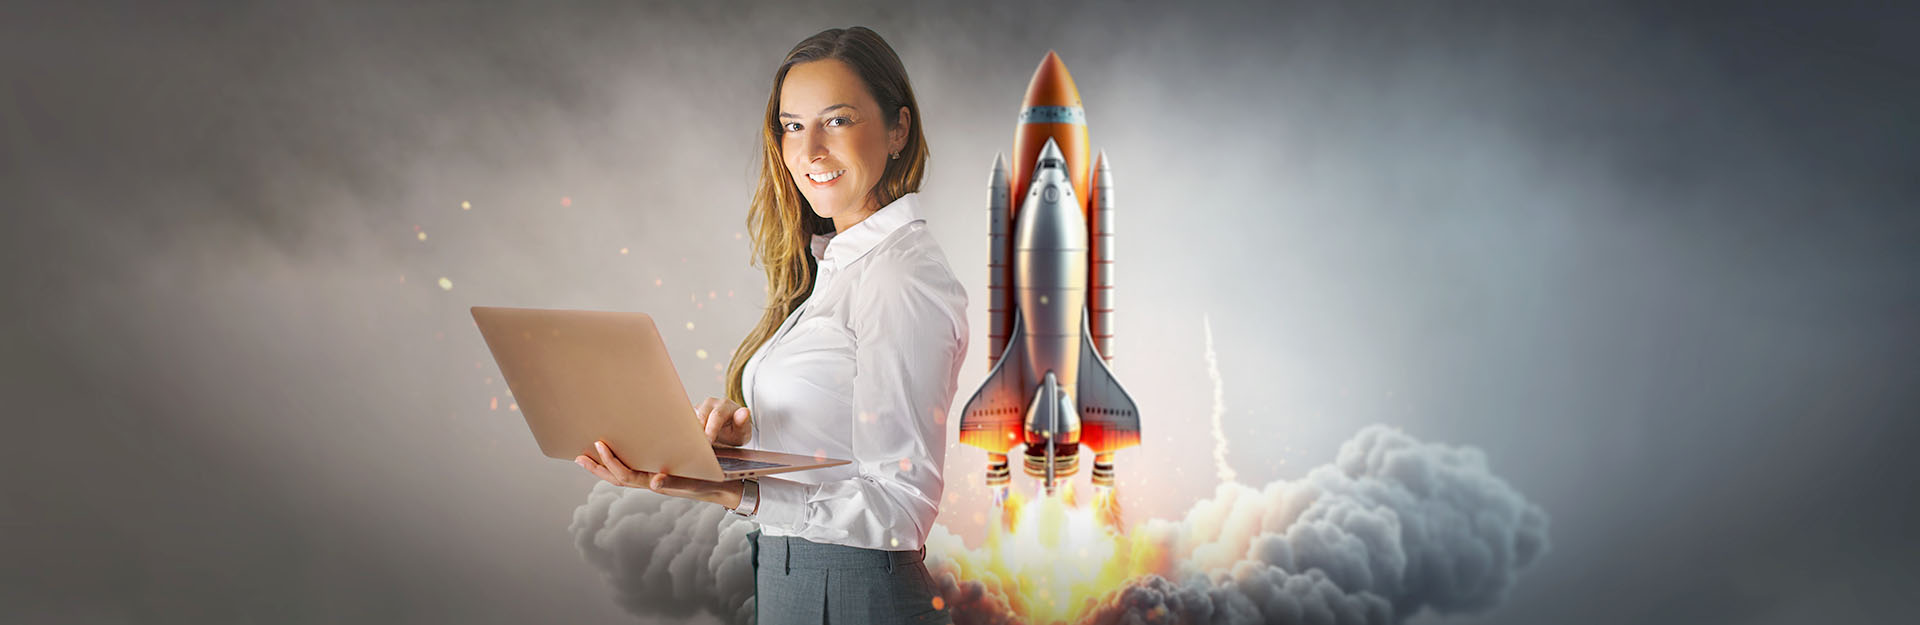 Woman holder laptop with rocket behind her